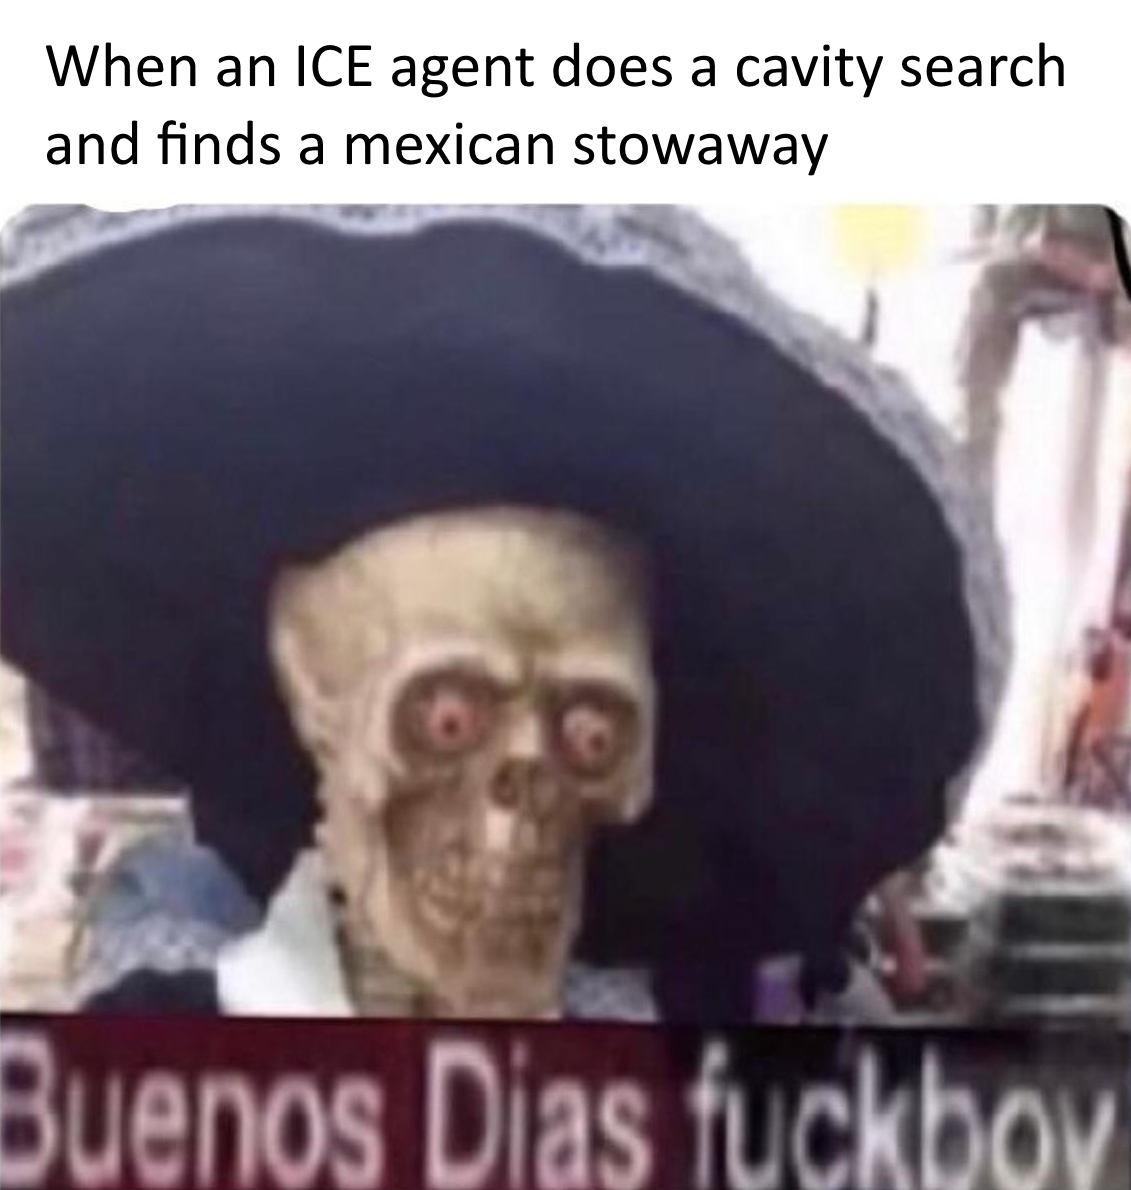 Your skeleton could be an illegal immigrant